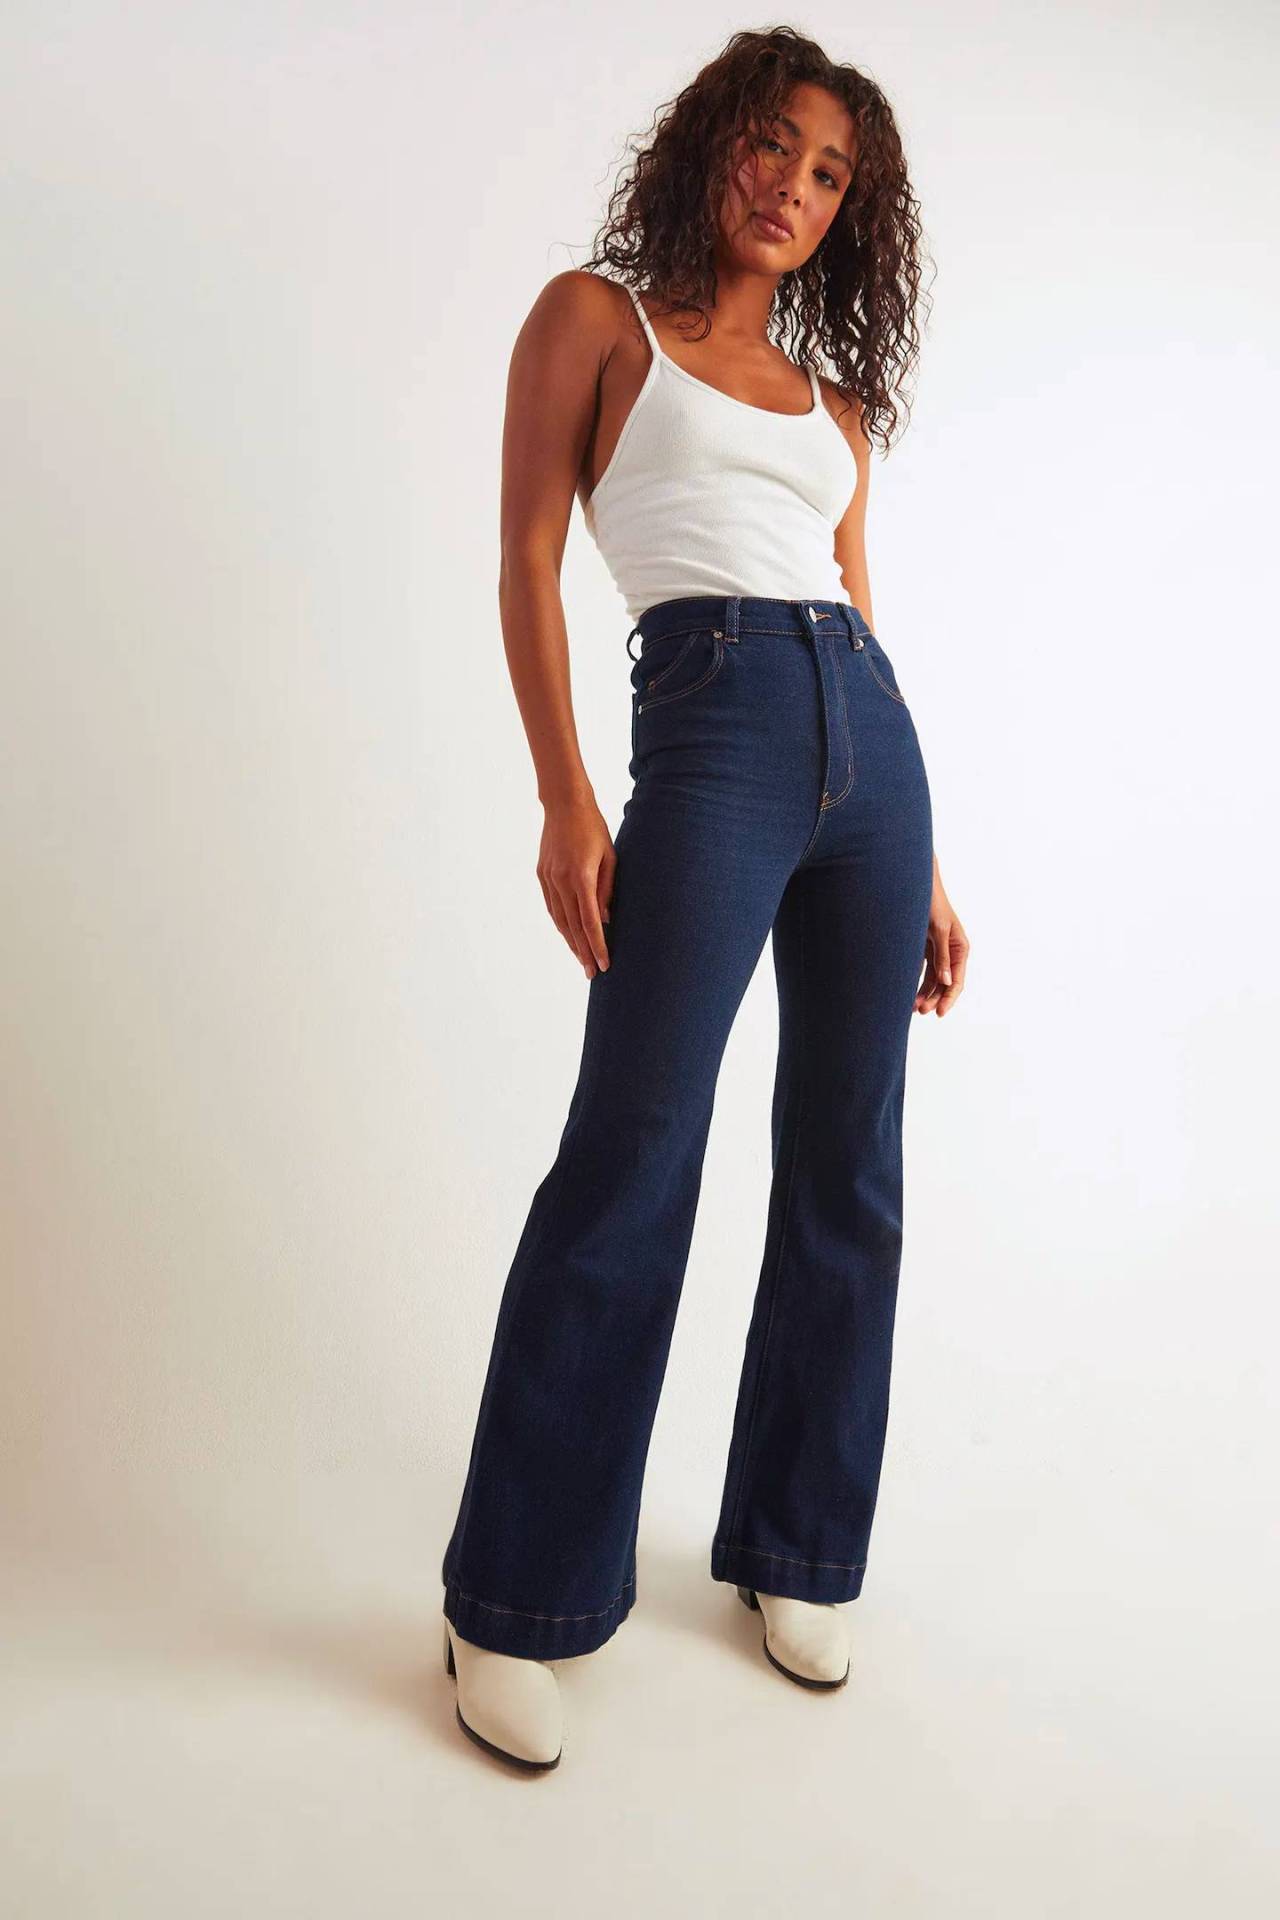 Phoebe Tonkin X Rolla's Dusters Bootcut Jeans by Rolla's Online, THE  ICONIC